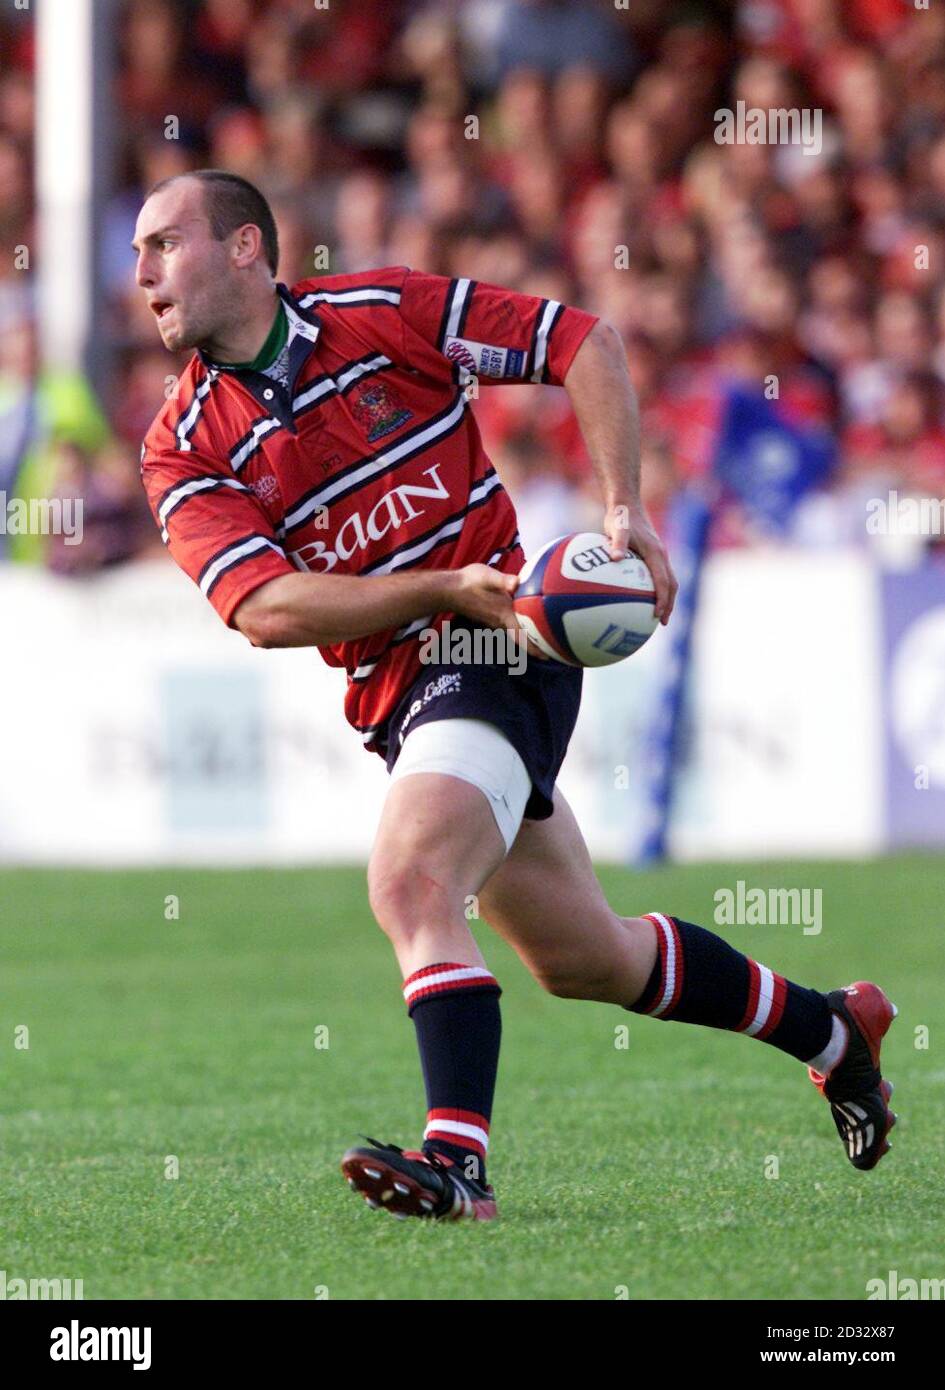 Ludovic Mercier in action for Gloucester against Saracens during the Zurich Premiership match at Kingsholm, Gloucester. Gloucester defeated Saracens 44-14. Stock Photo